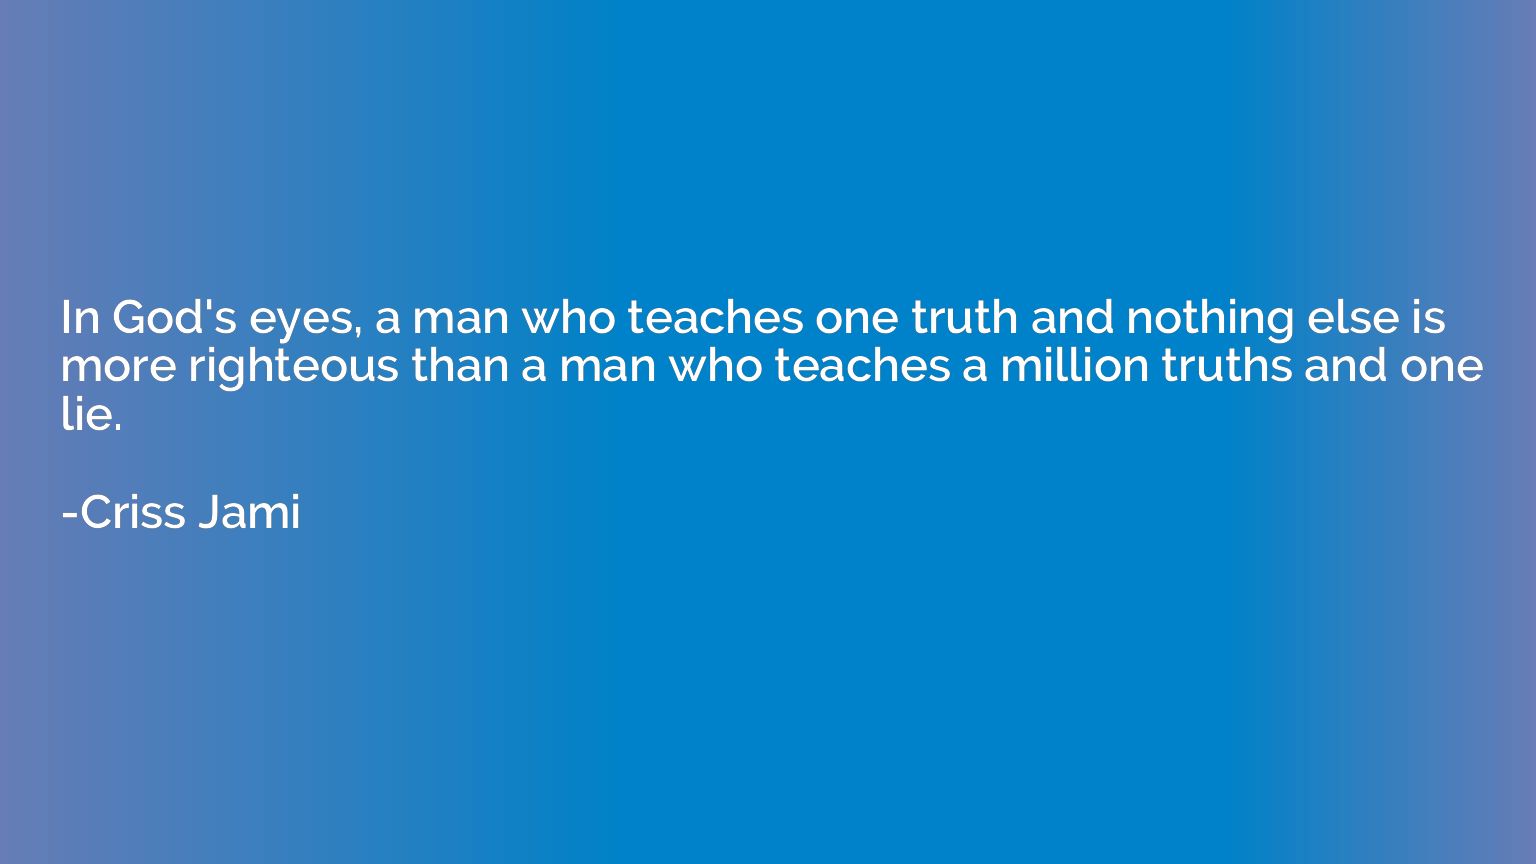 In God's eyes, a man who teaches one truth and nothing else 